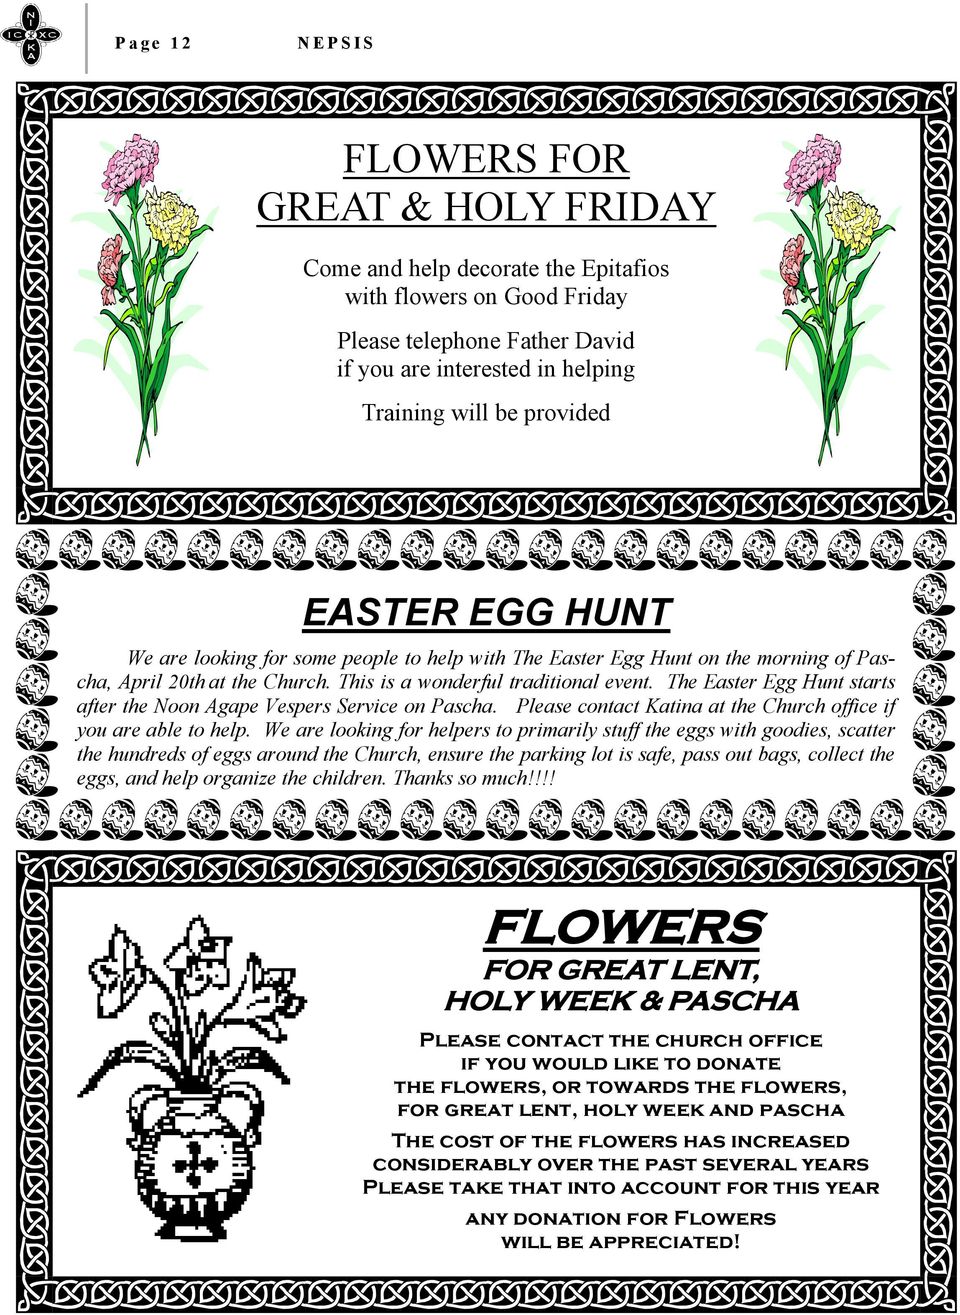 The Easter Egg Hunt starts after the Noon Agape Vespers Service on Pascha. Please contact Katina at the Church office if you are able to help.